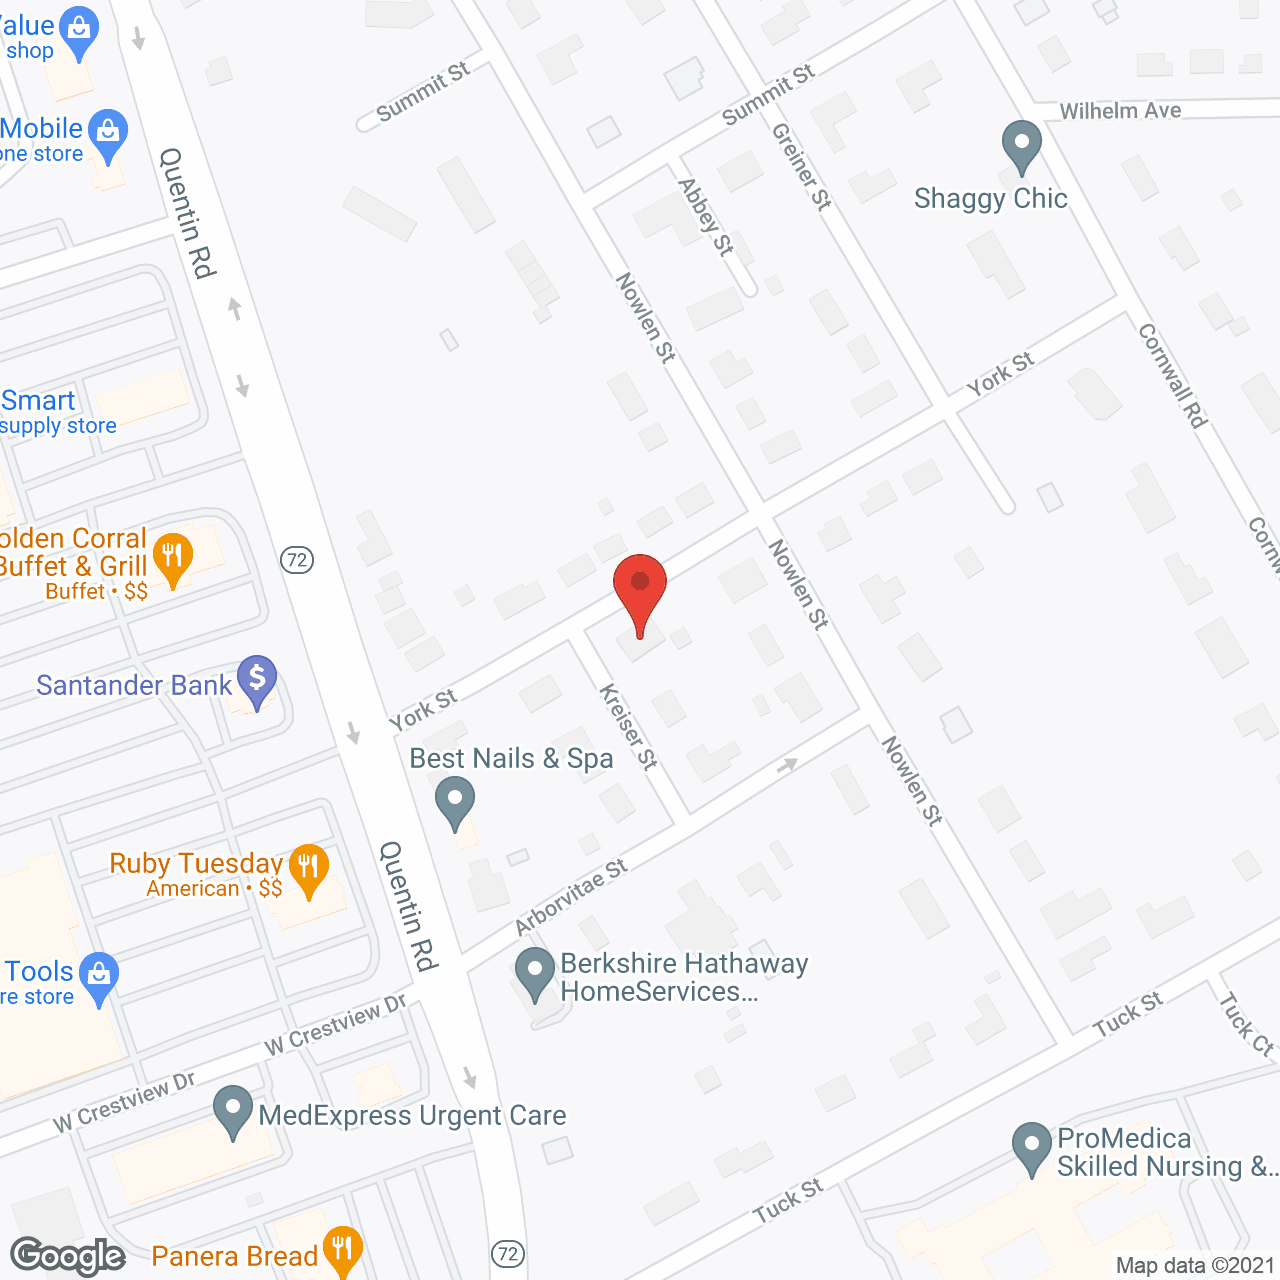 York Street Personal Care Home Inc. in google map